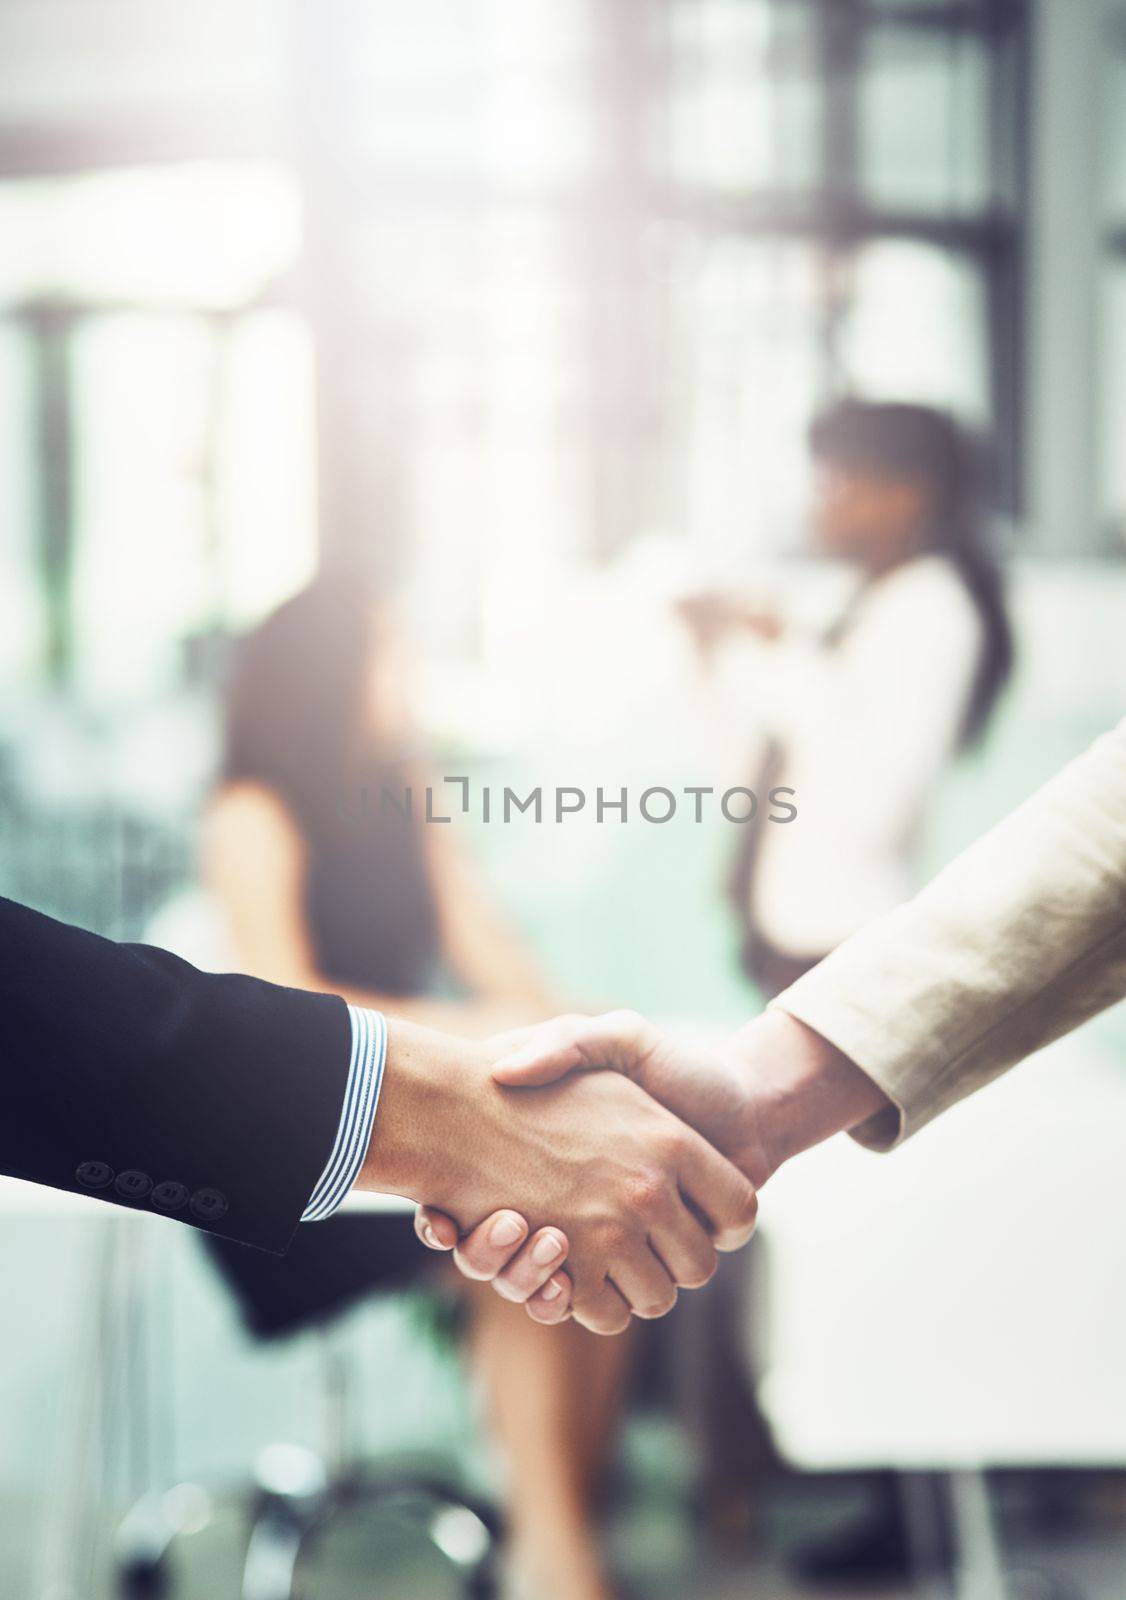 Congratulations for being a part of our team. businesspeople shaking hands in an office